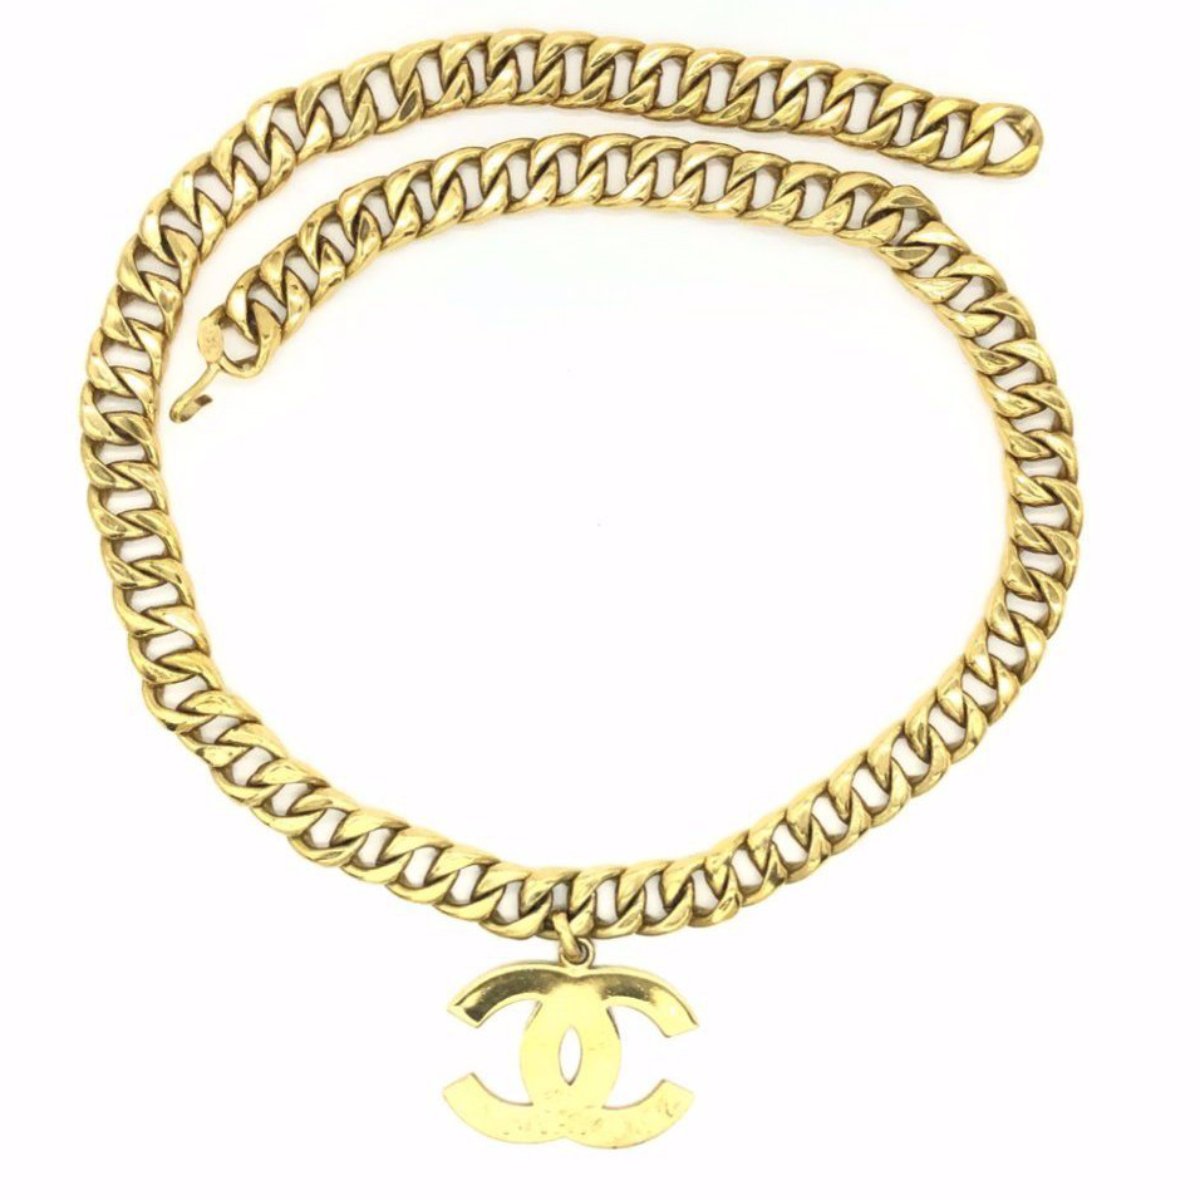 Exceptional CHANEL necklace chain bracelet and plate set with